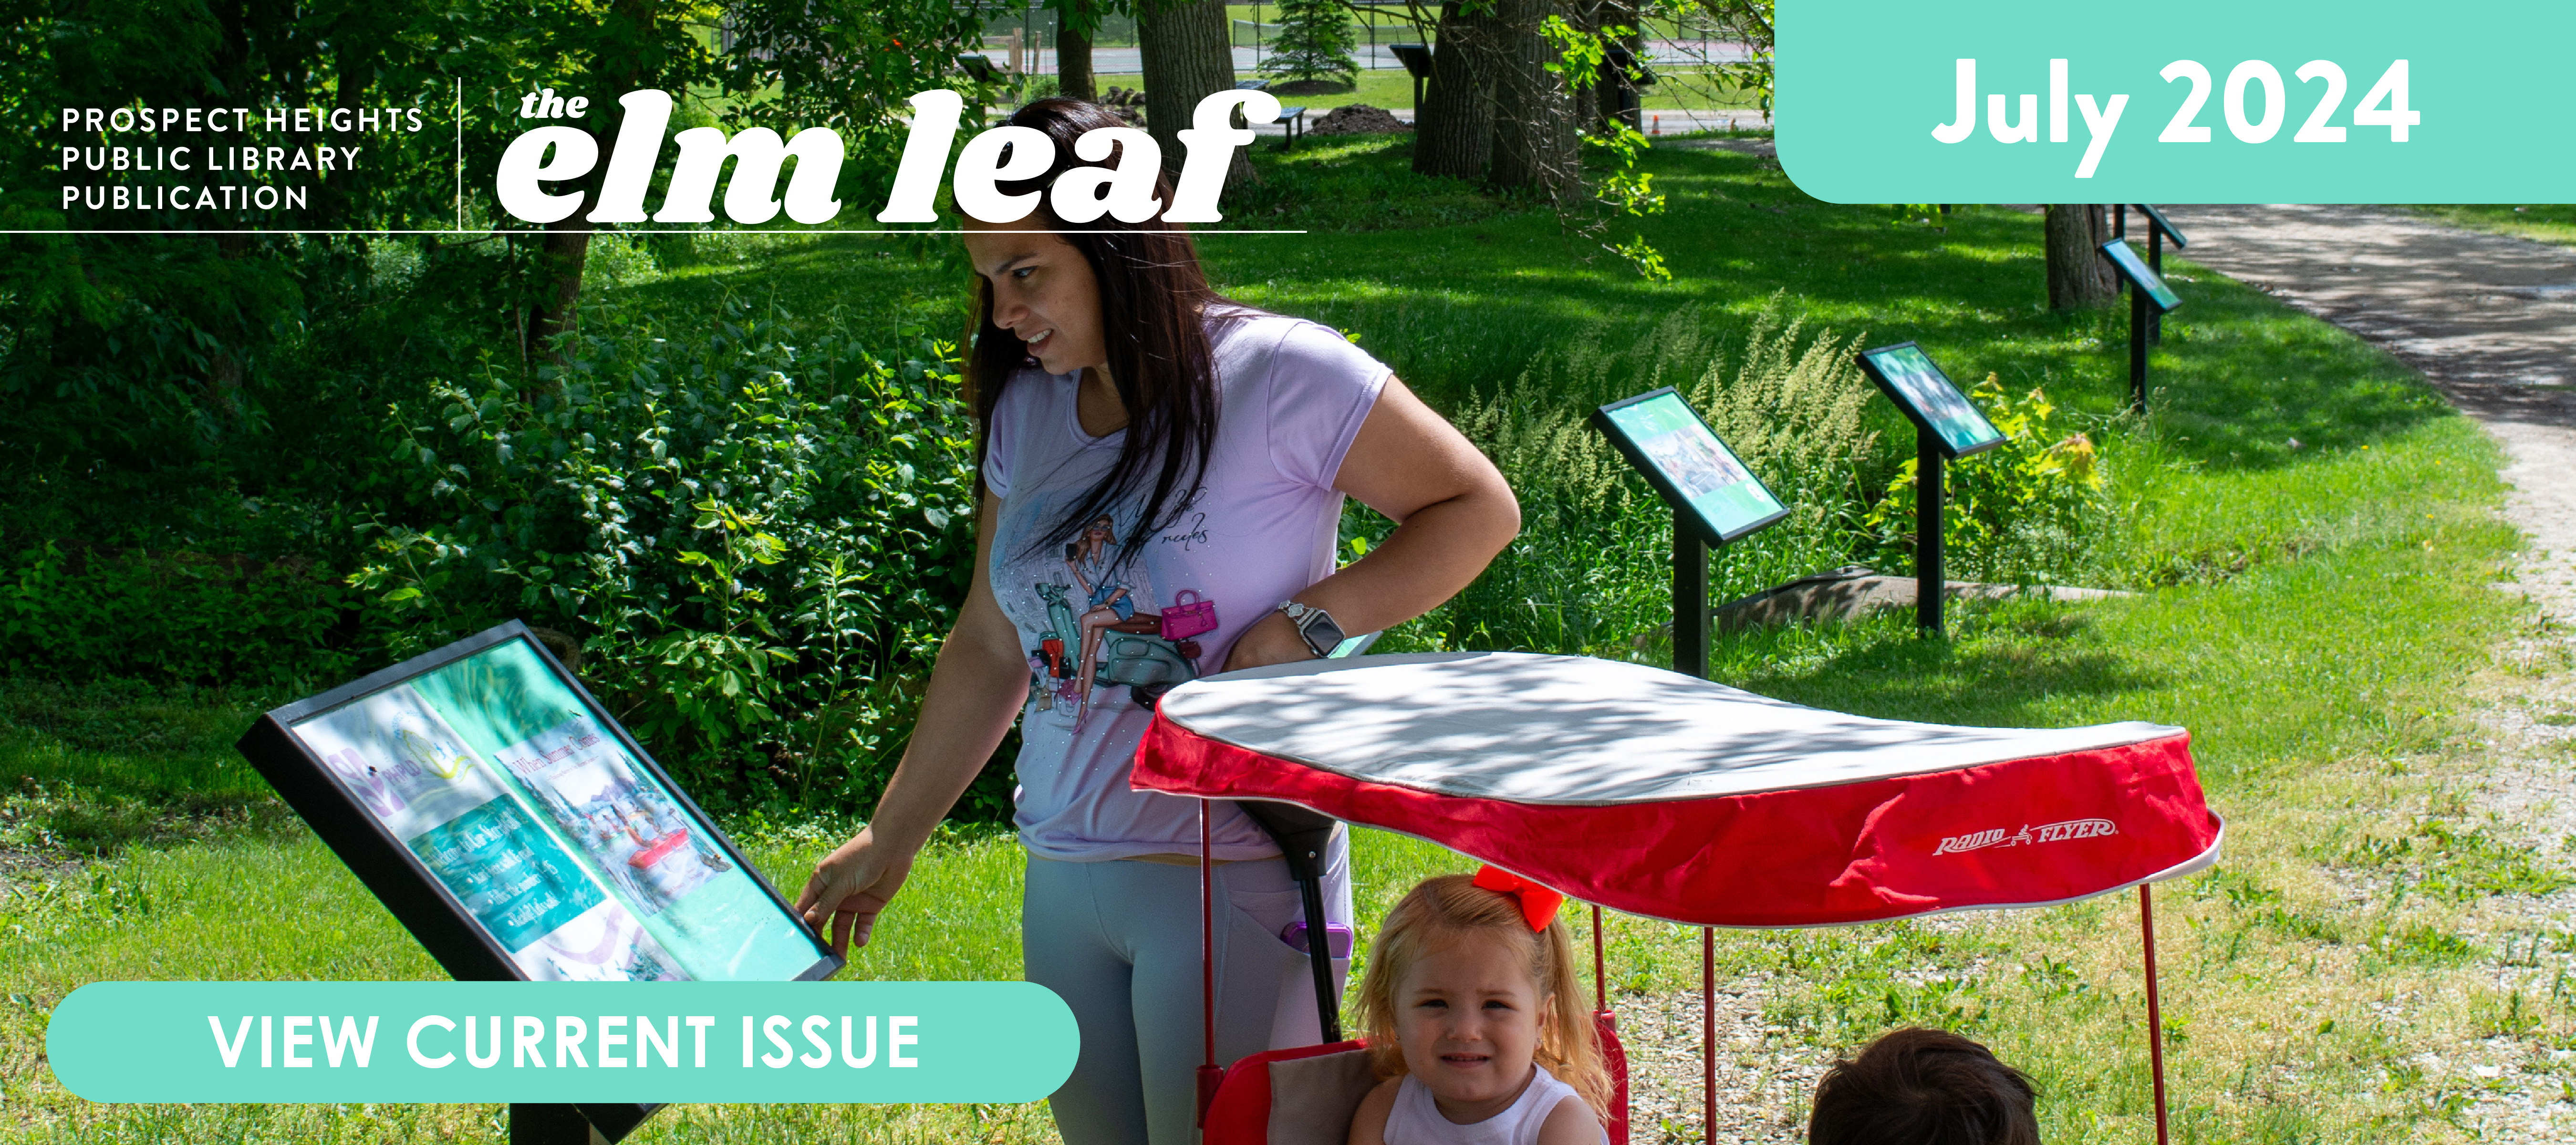 phpl, Prospect Heights Public Library, The Elm Leaf, July Issue, View Current Issue, PHPL Elm Leaf